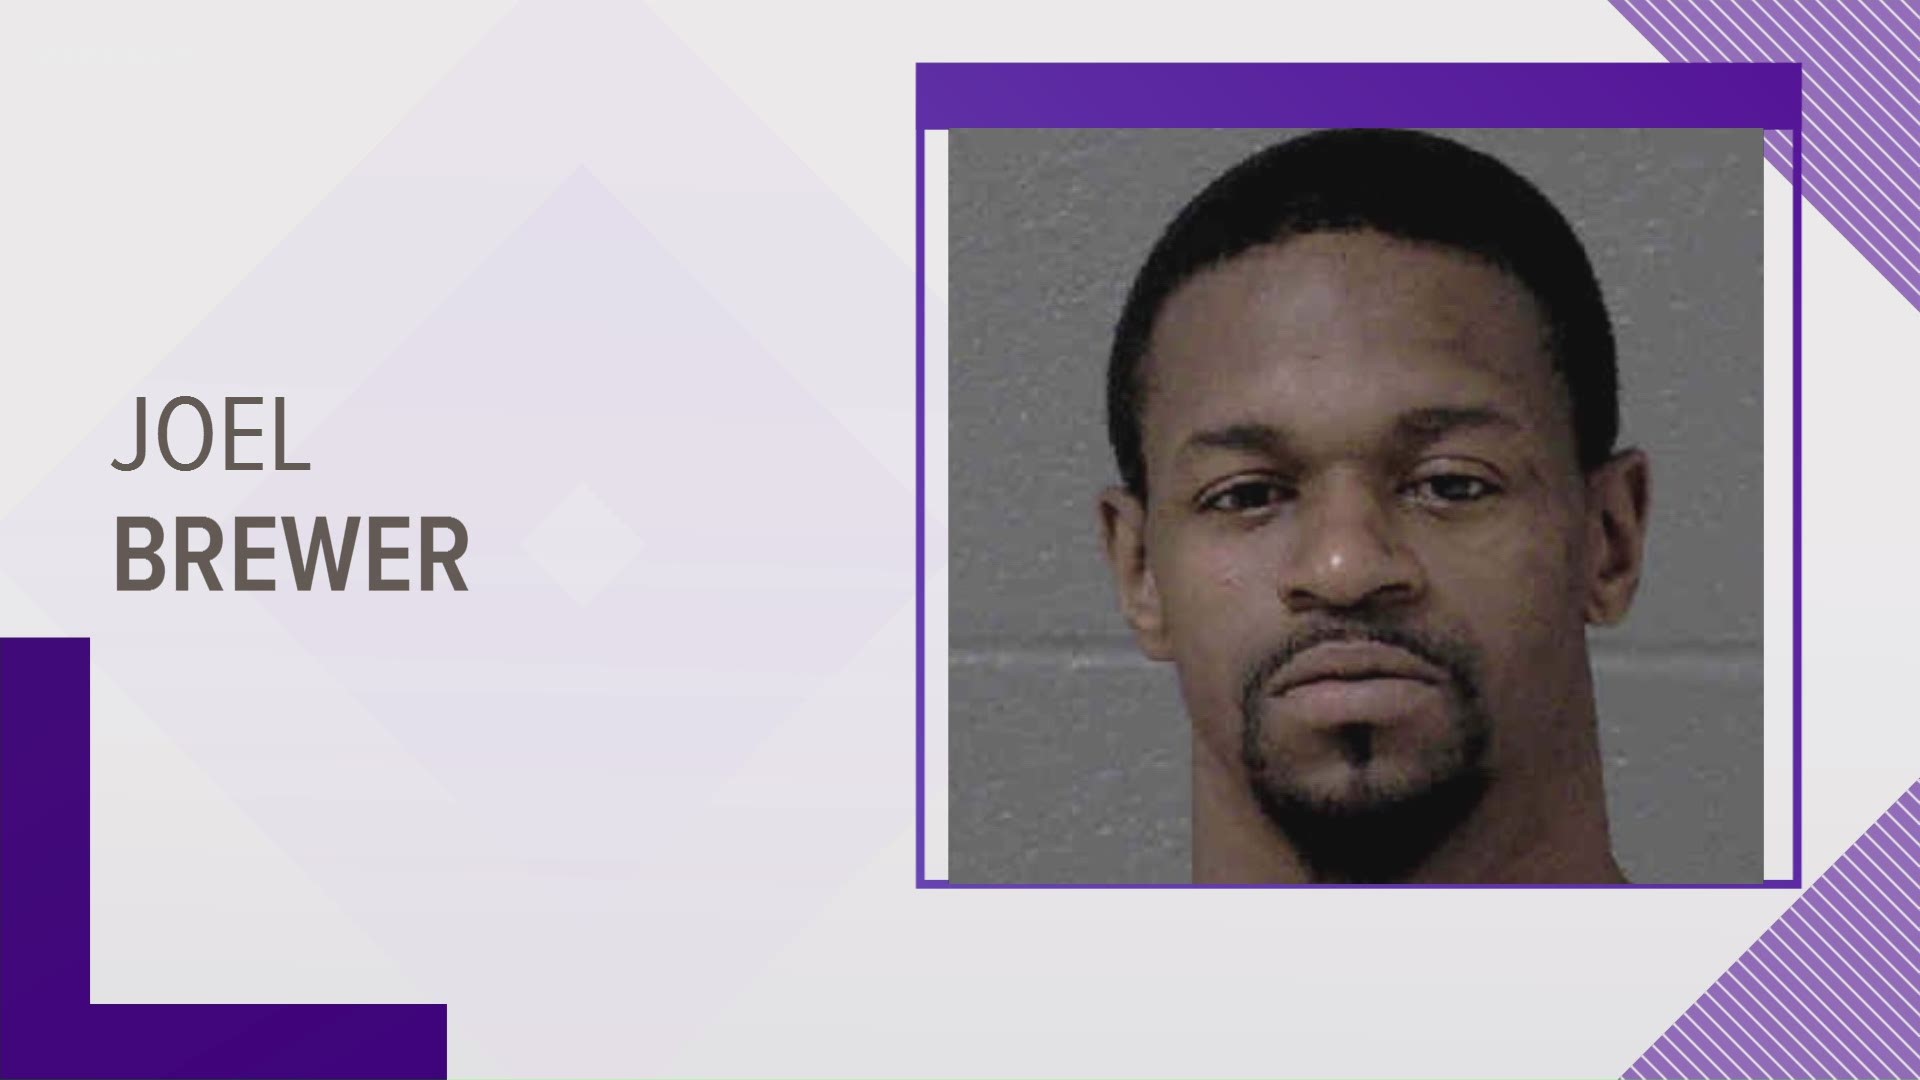 Joel Isaiah Brewer was in jail in connection with the killing of two Black transgender women in April. He's now accused of killing a third person in Union County.